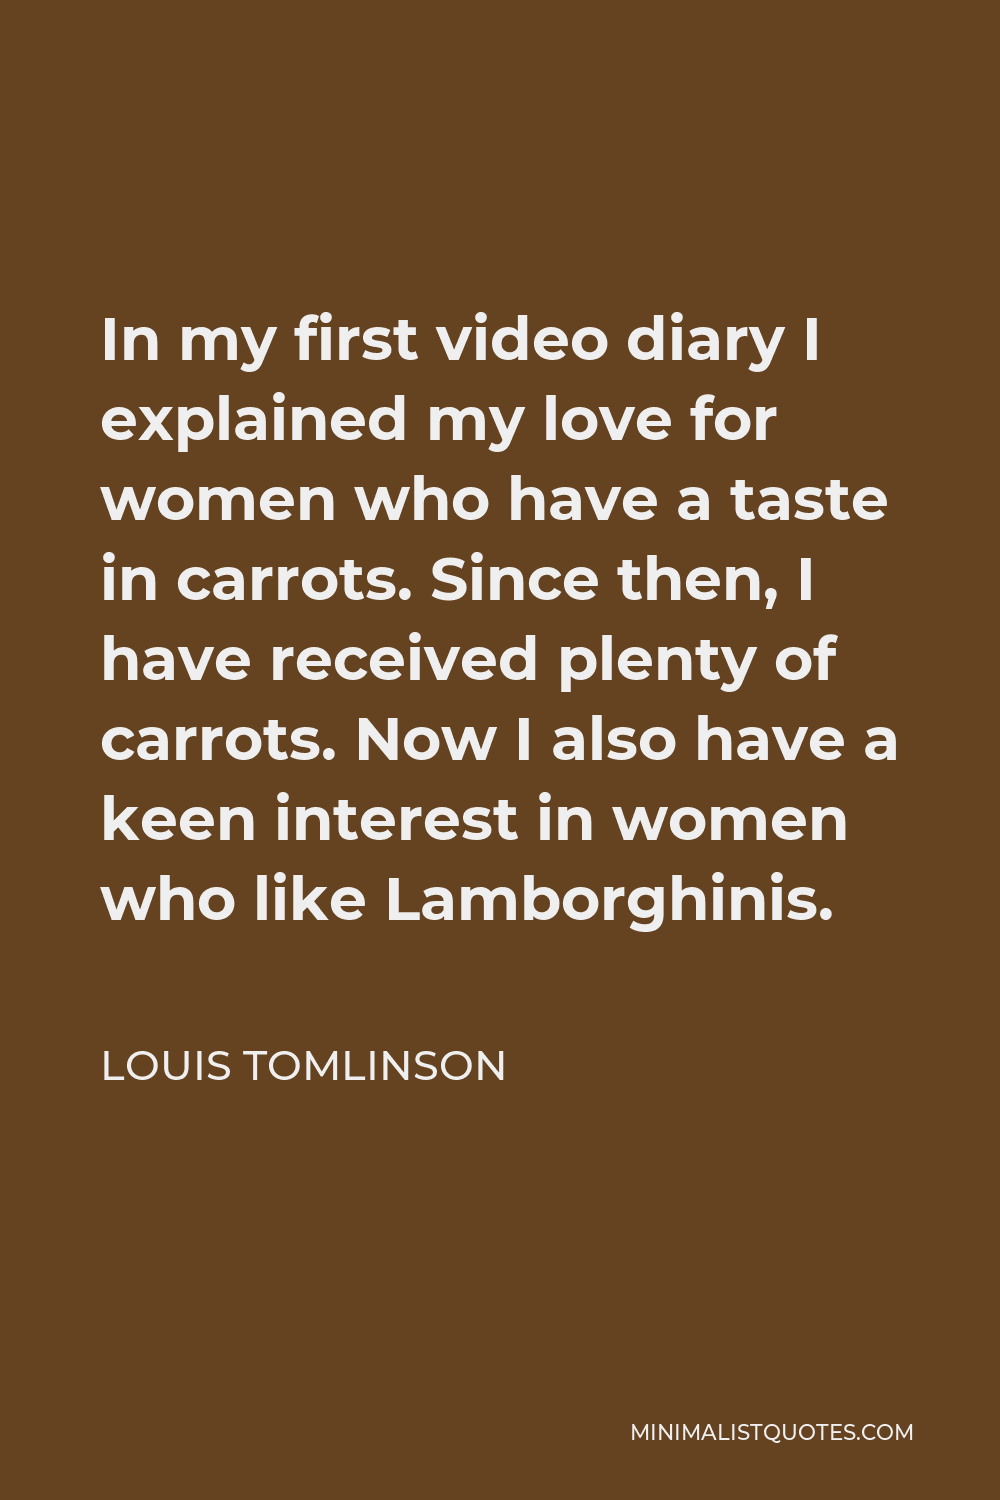 Louis Tomlinson Quote - In my first video diary I explained my love for women who have a taste in carrots. Since then, I have received plenty of carrots. Now I also have a keen interest in women who like Lamborghinis.